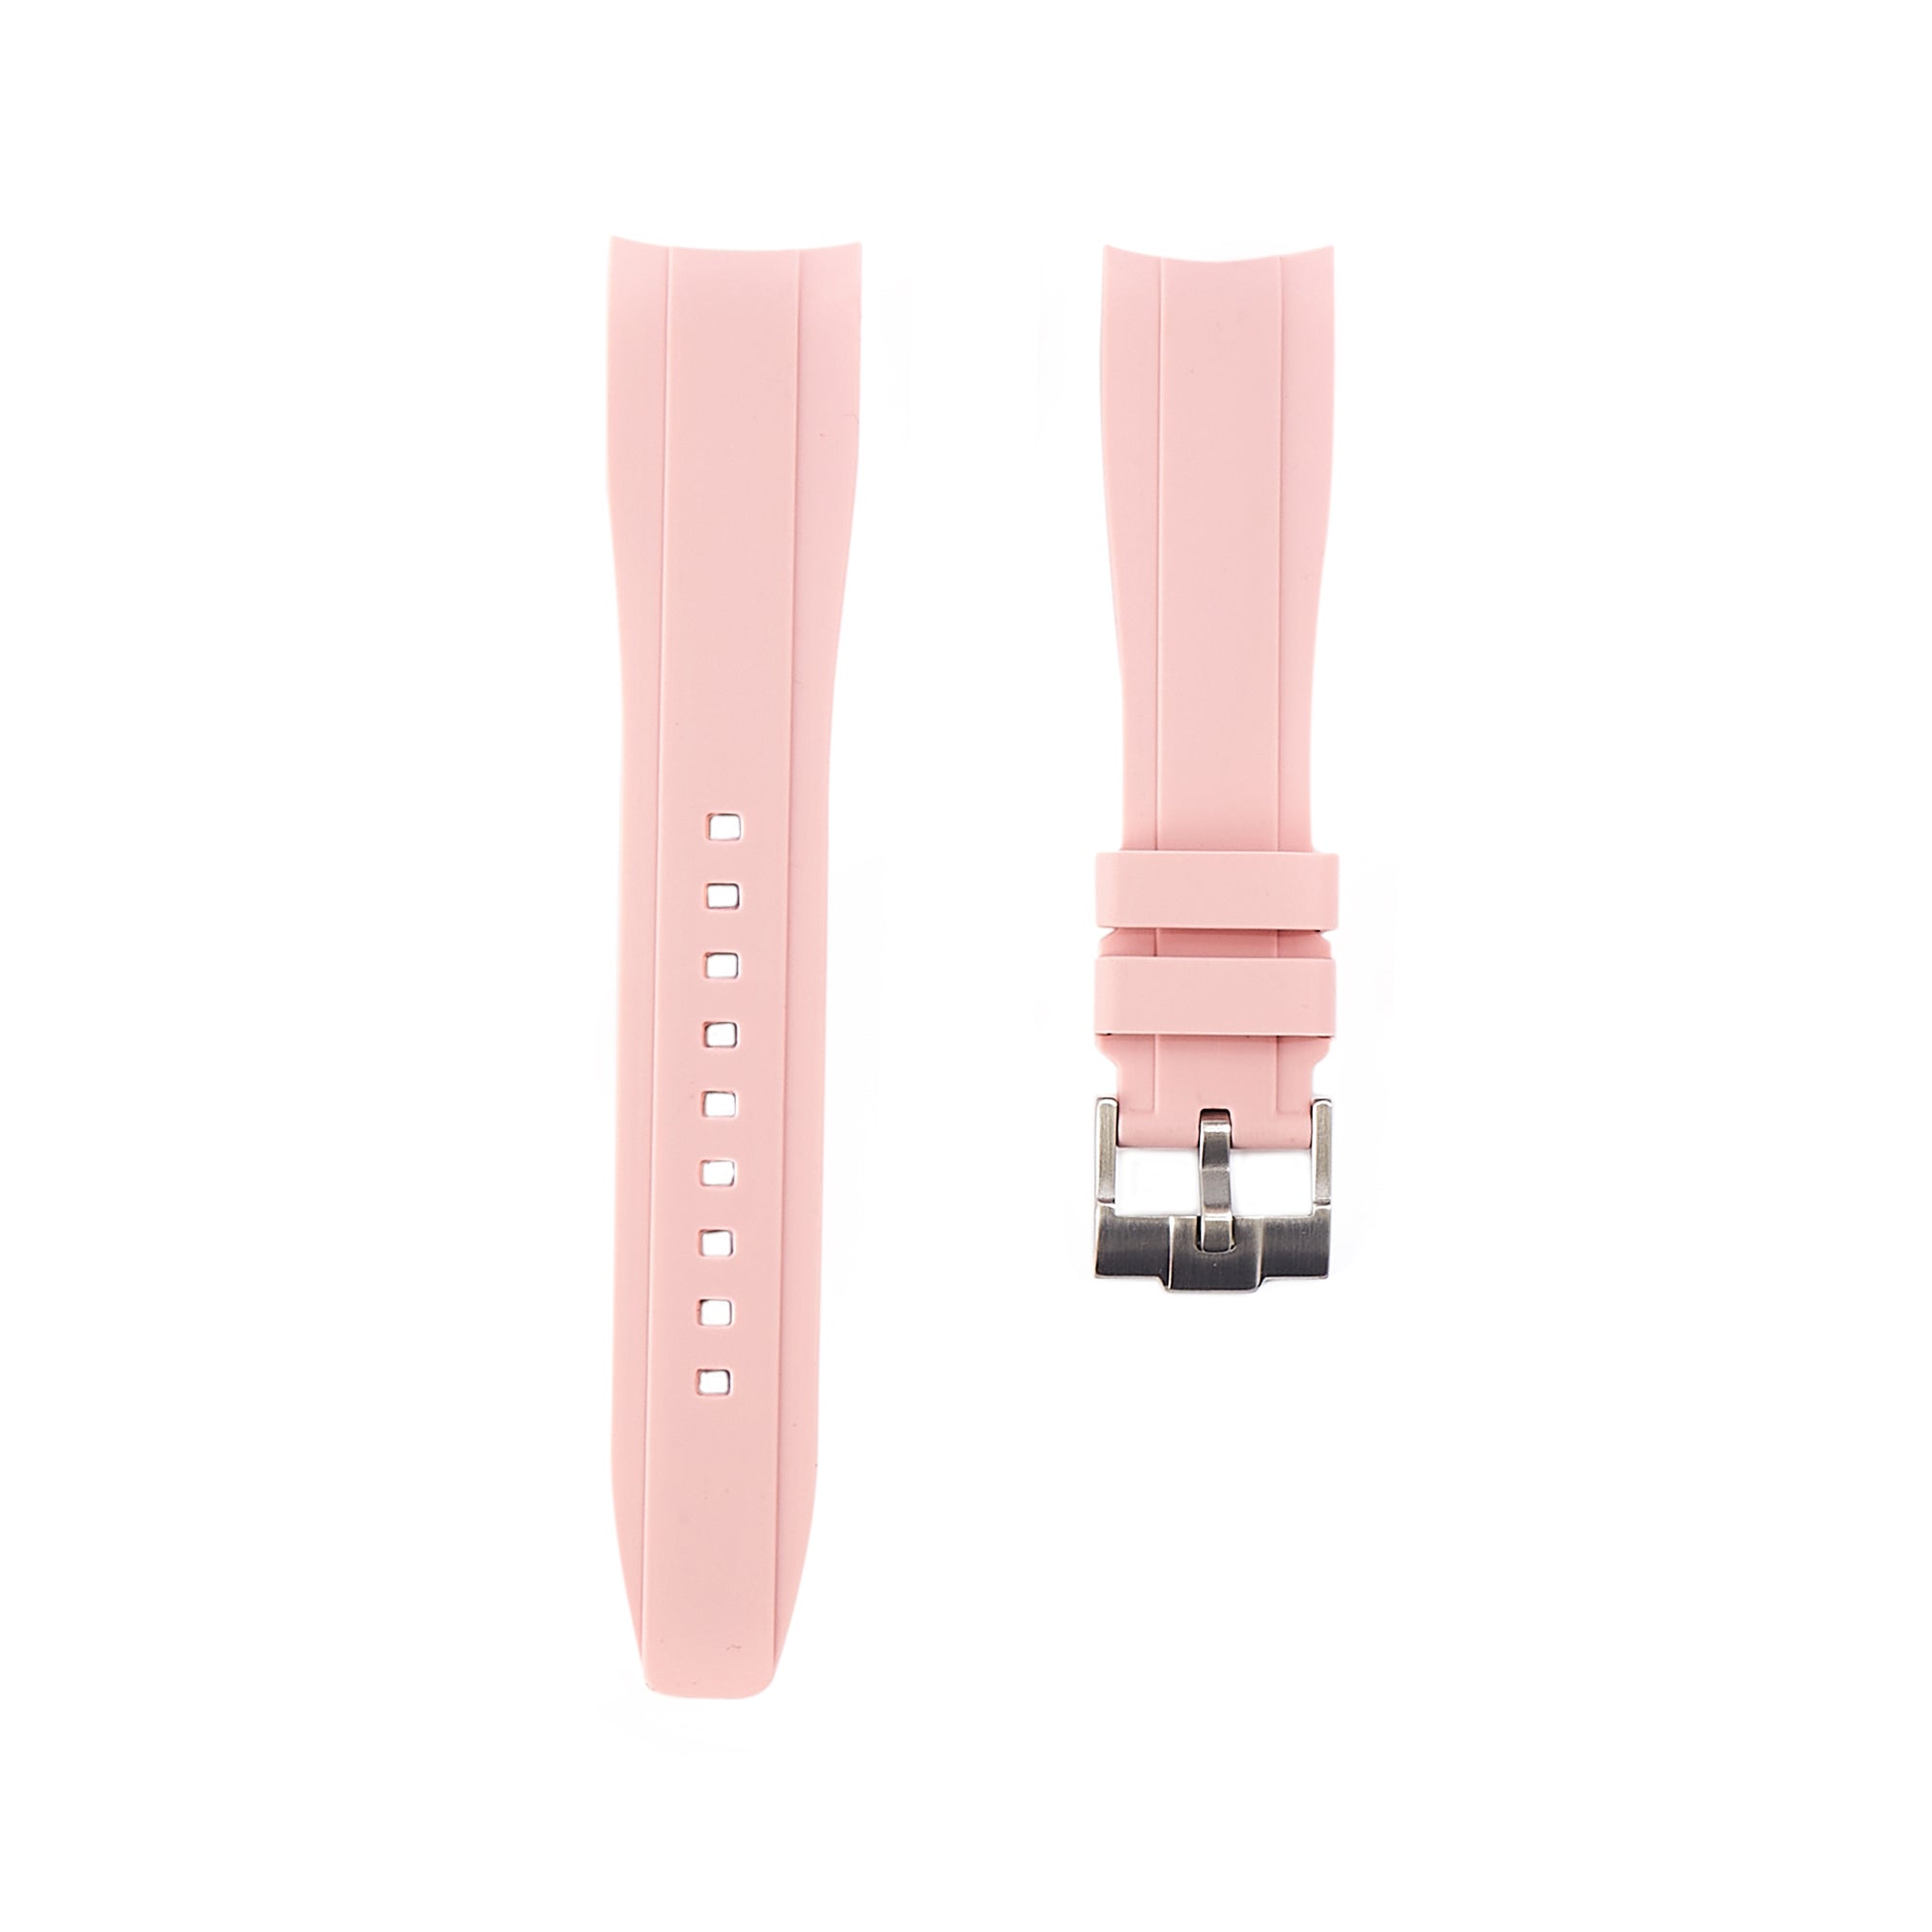 Curved End Soft Silicone Strap - Compatible with Seiko Sports – Light Pink (2418) -StrapSeeker